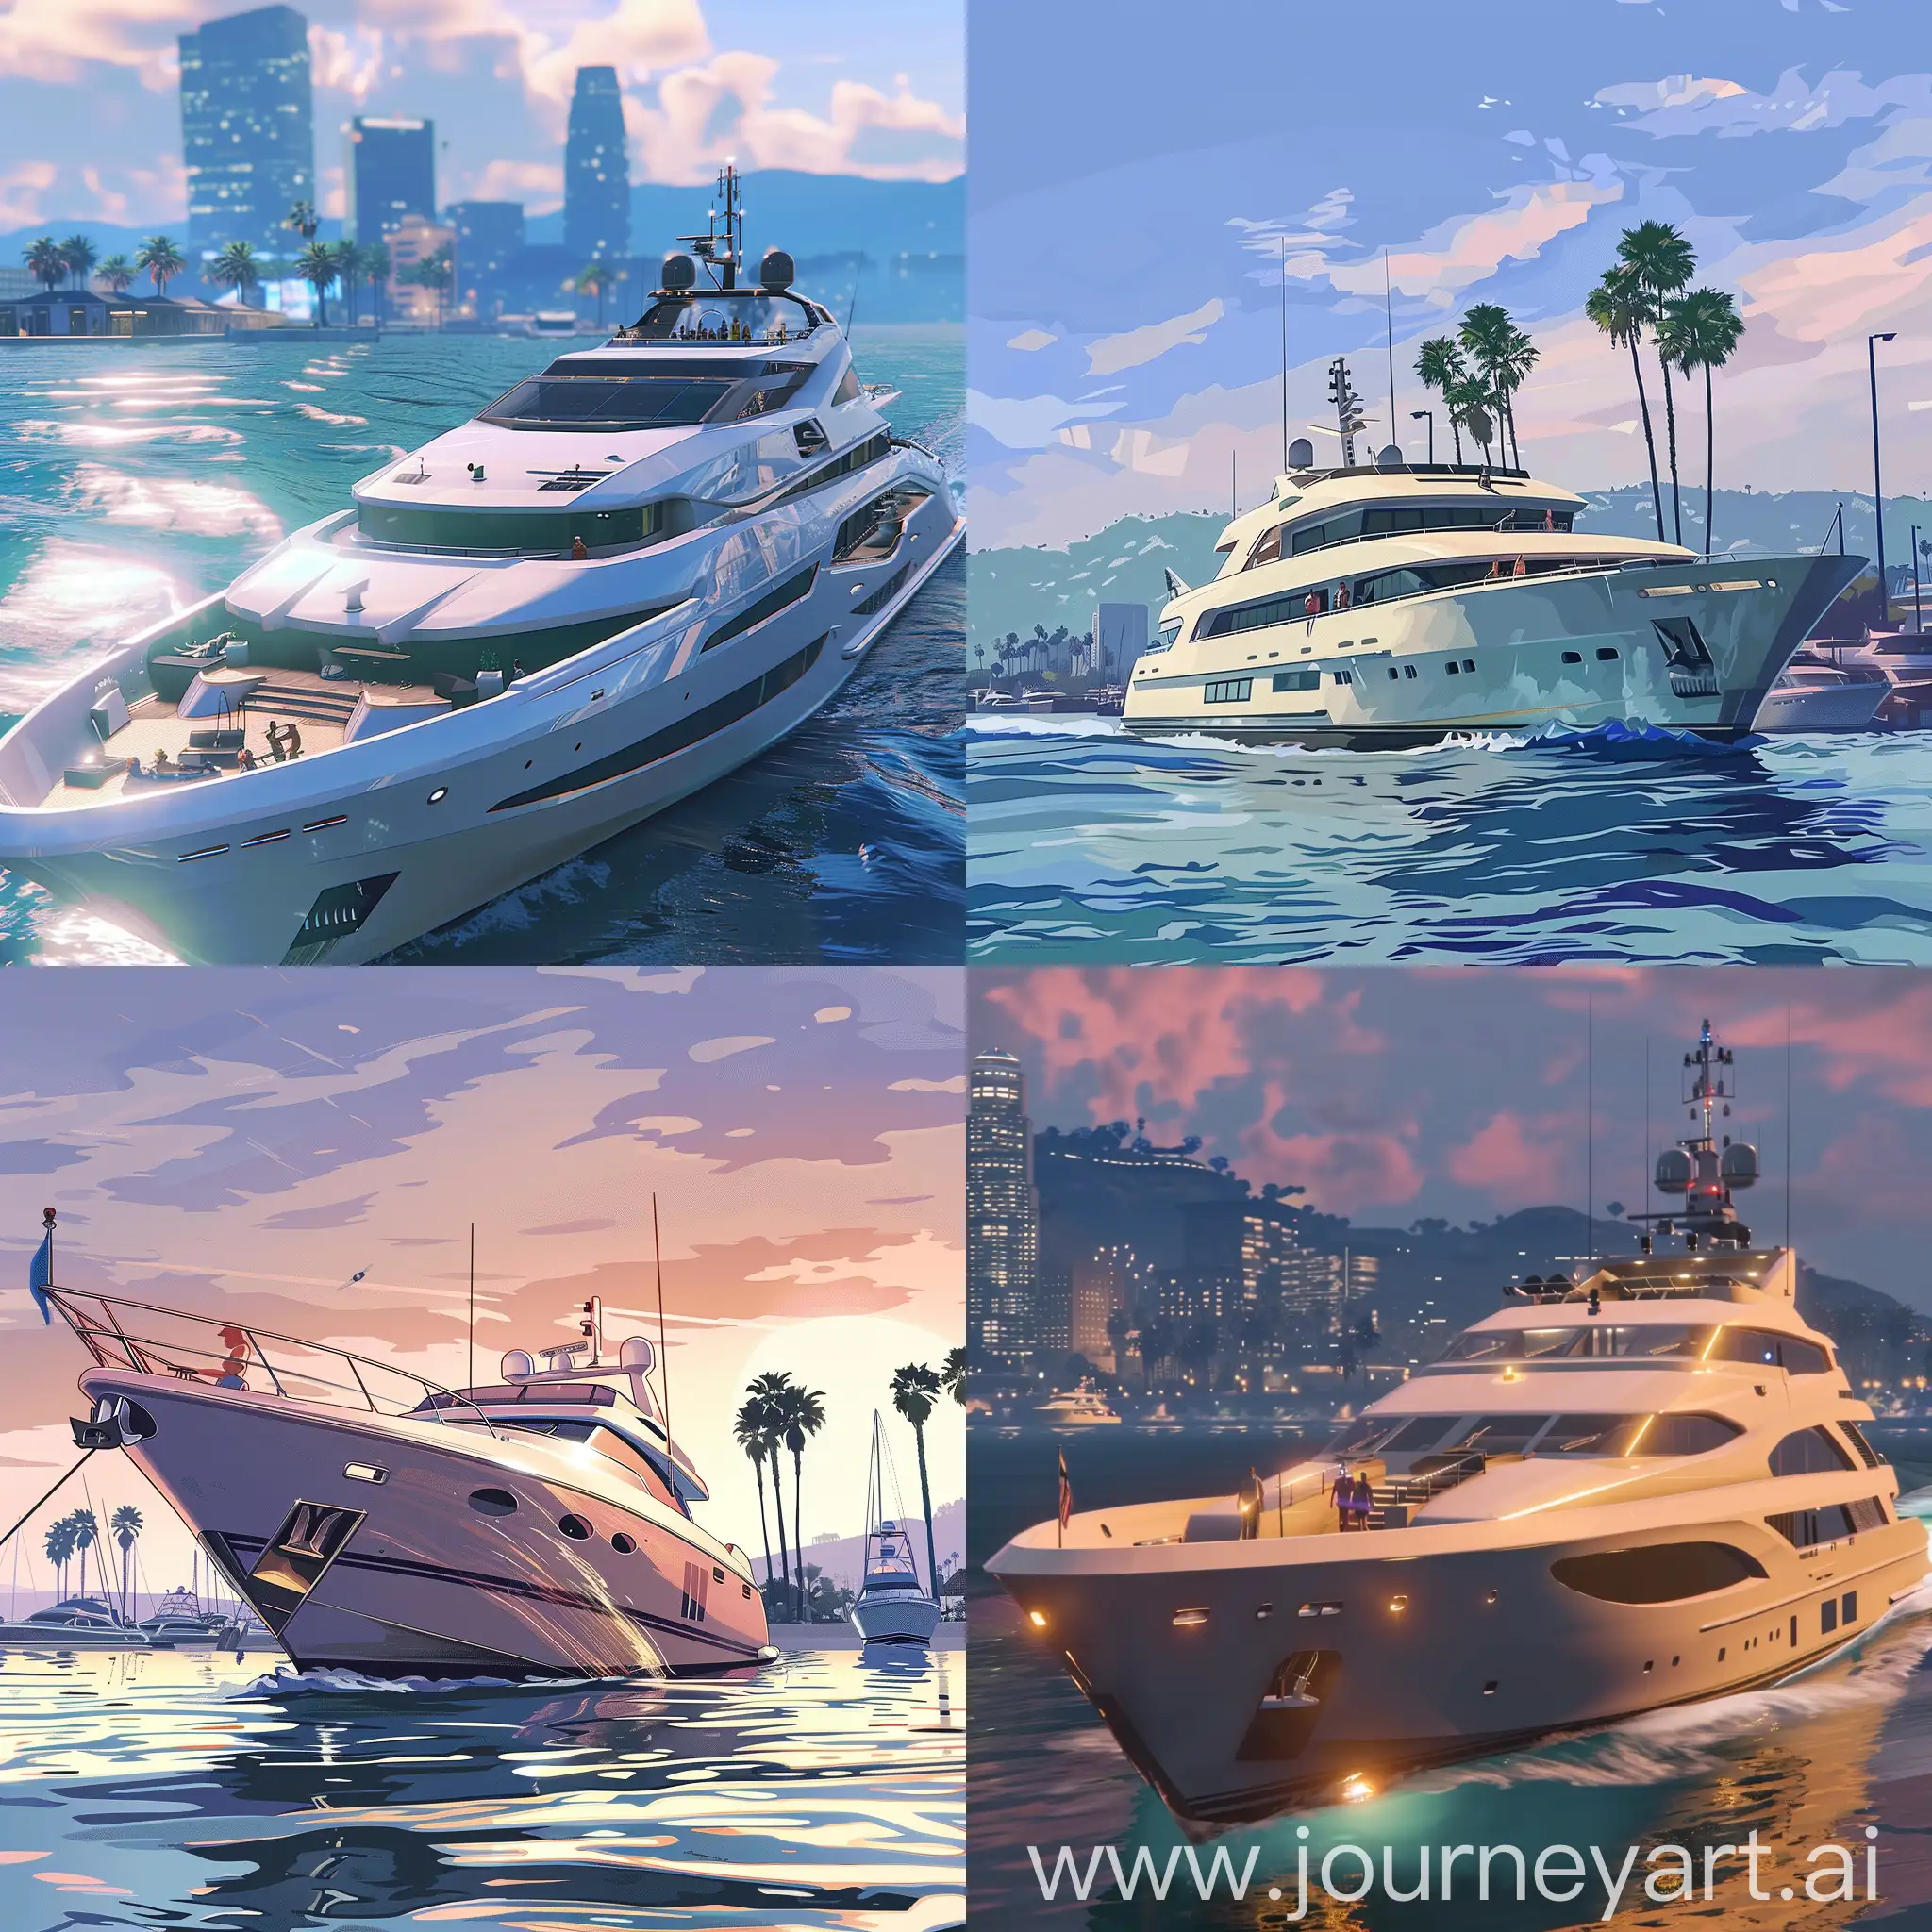 Luxury-Superyacht-with-Vacationing-People-GTA-V-Style